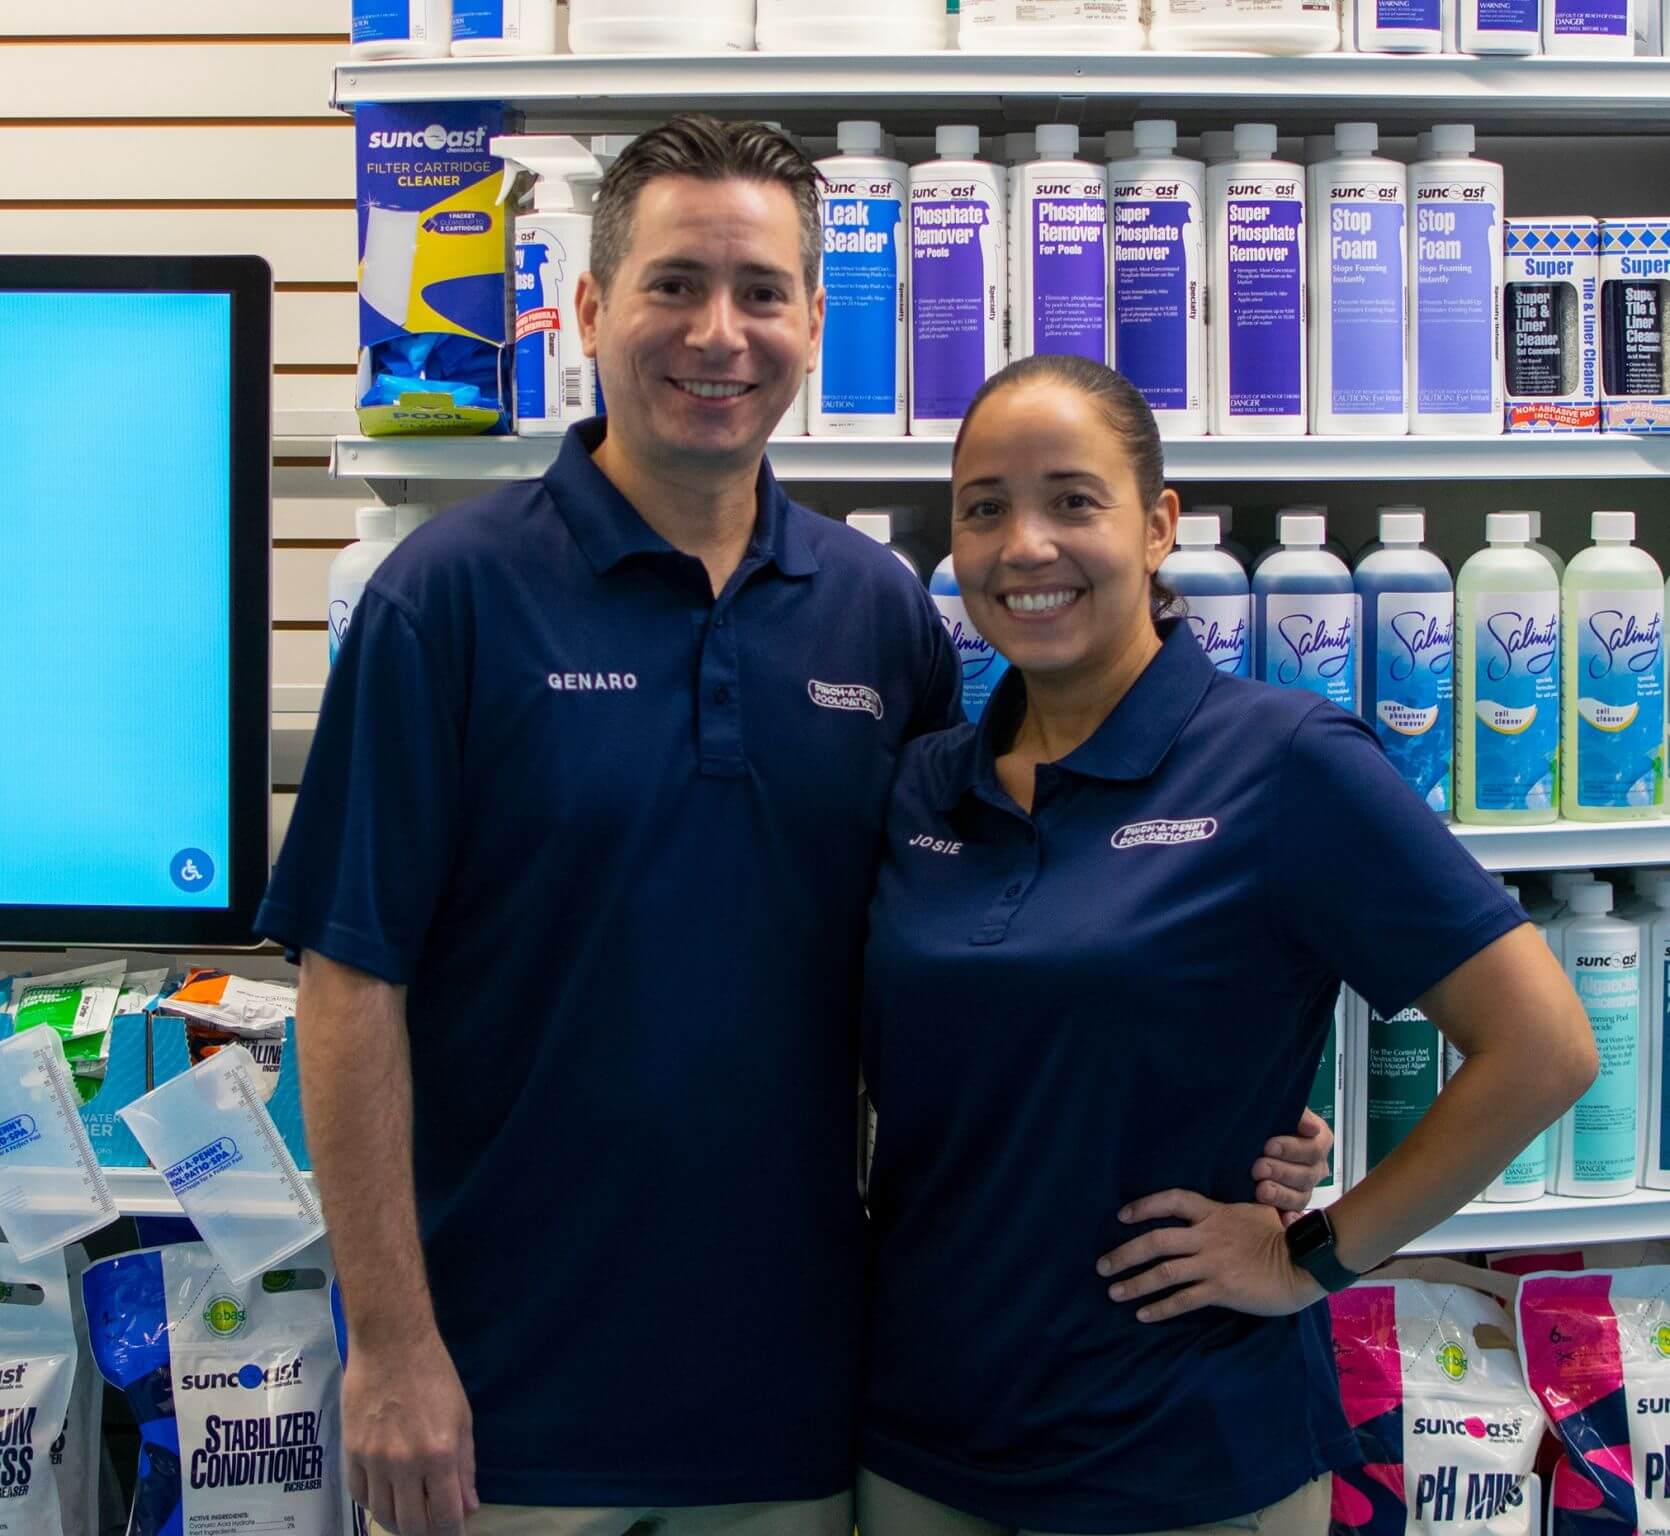 pinch-a-penny-store-reopens-under-new-ownership-in-wellington-fl